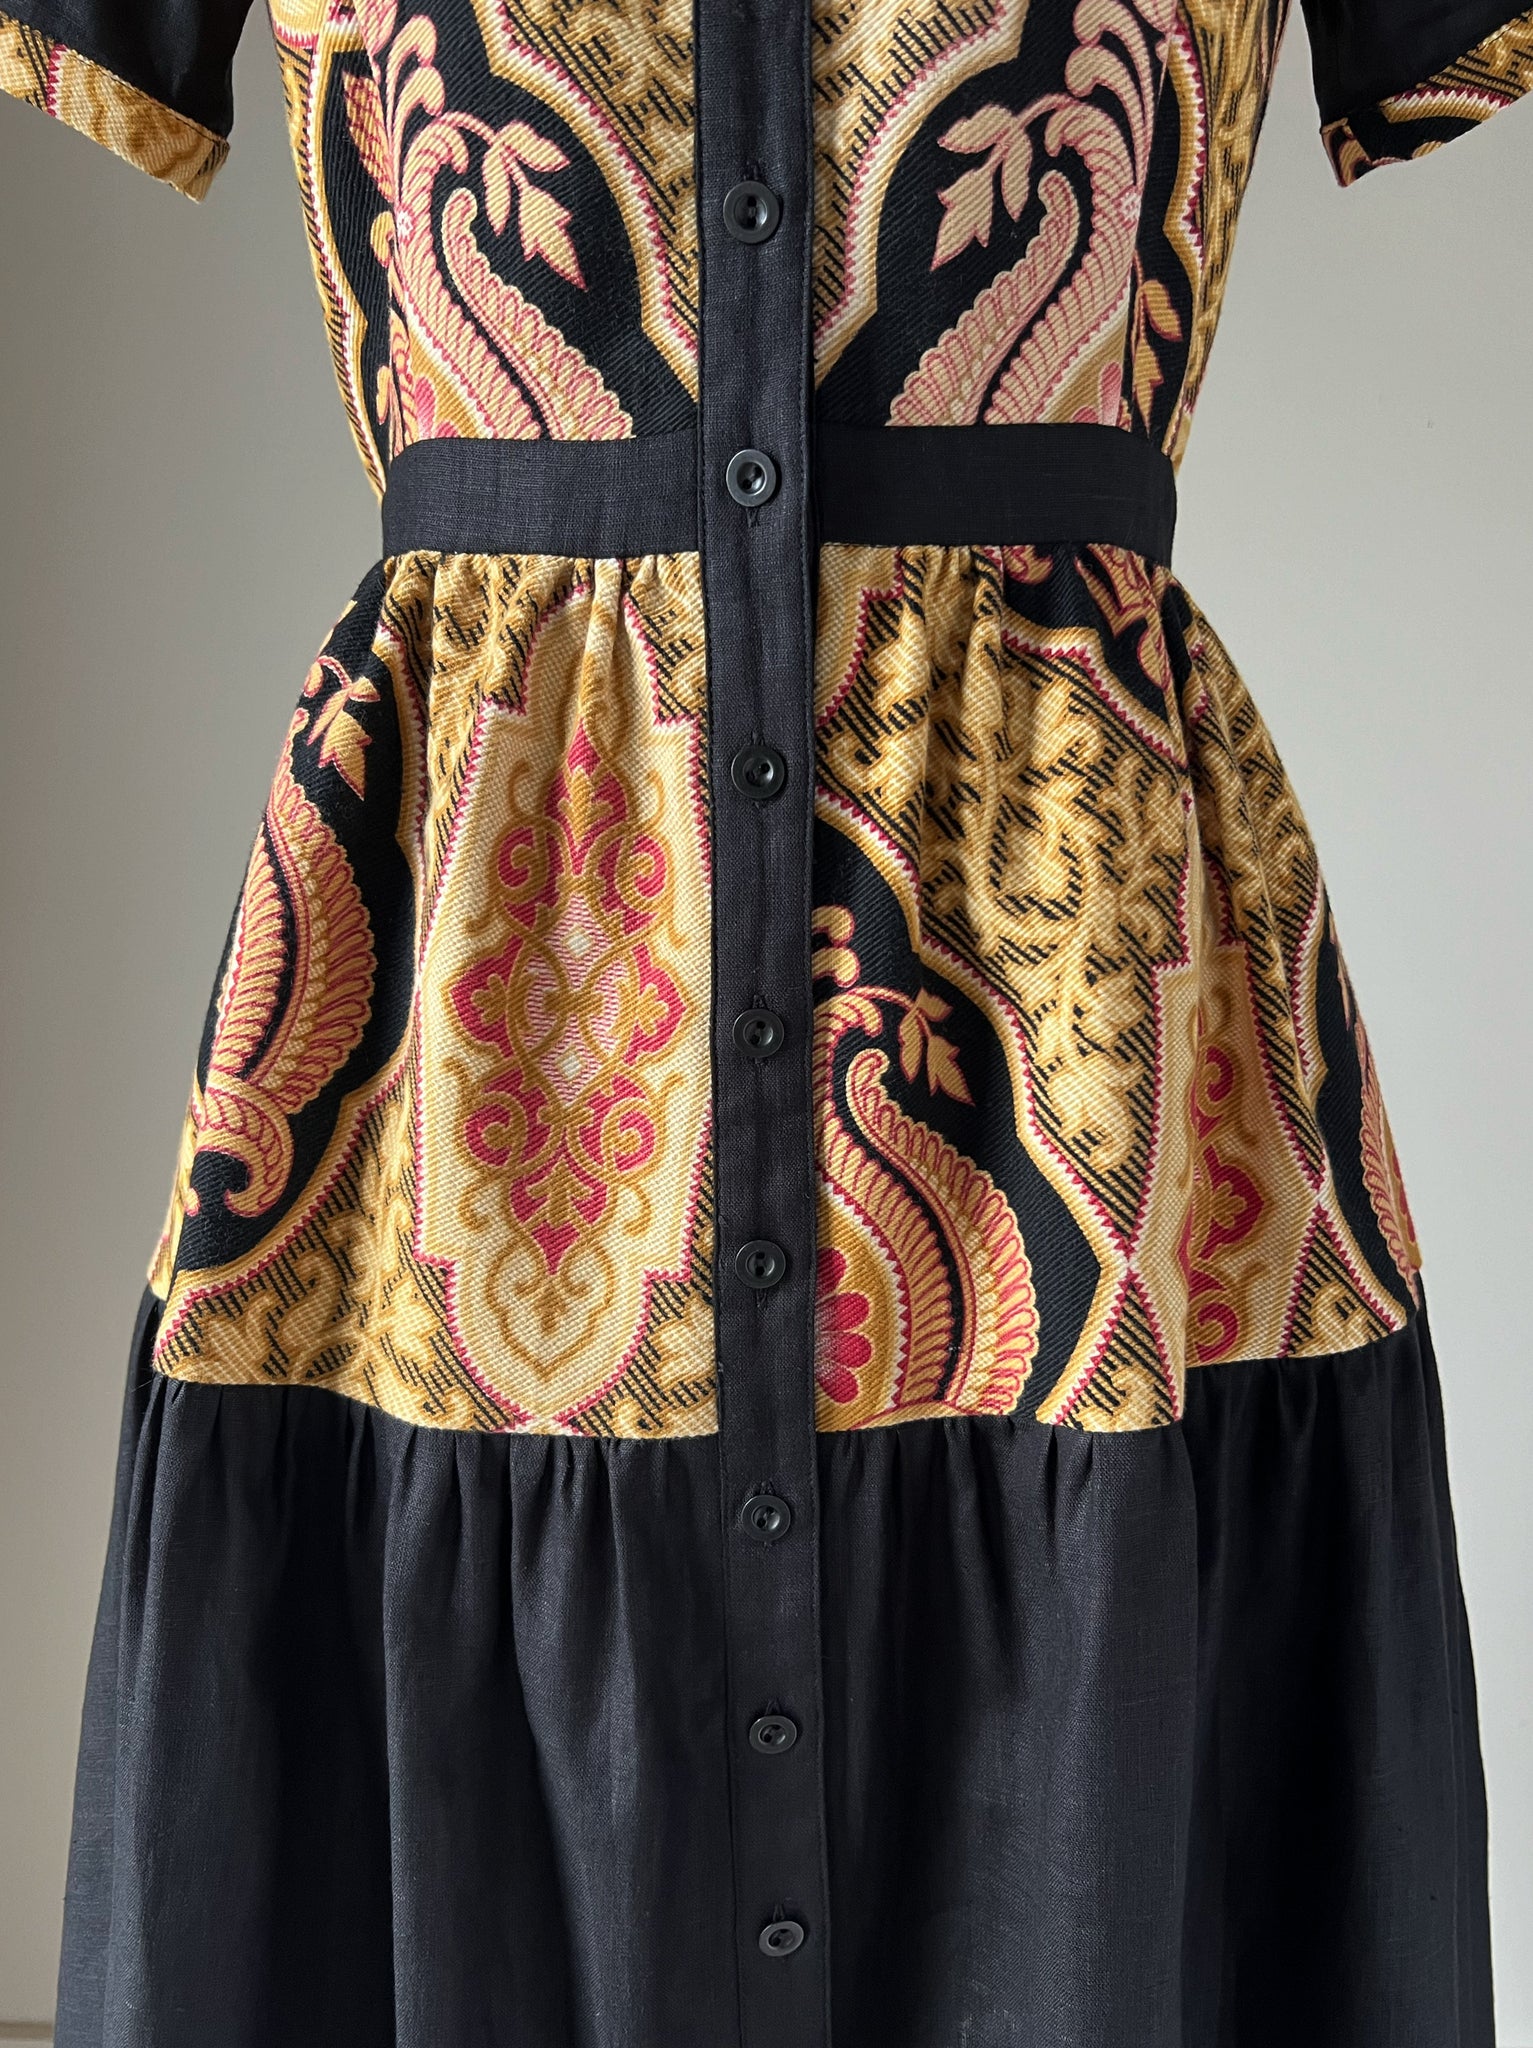 19th century medallion print patched tiered dress s,m,l